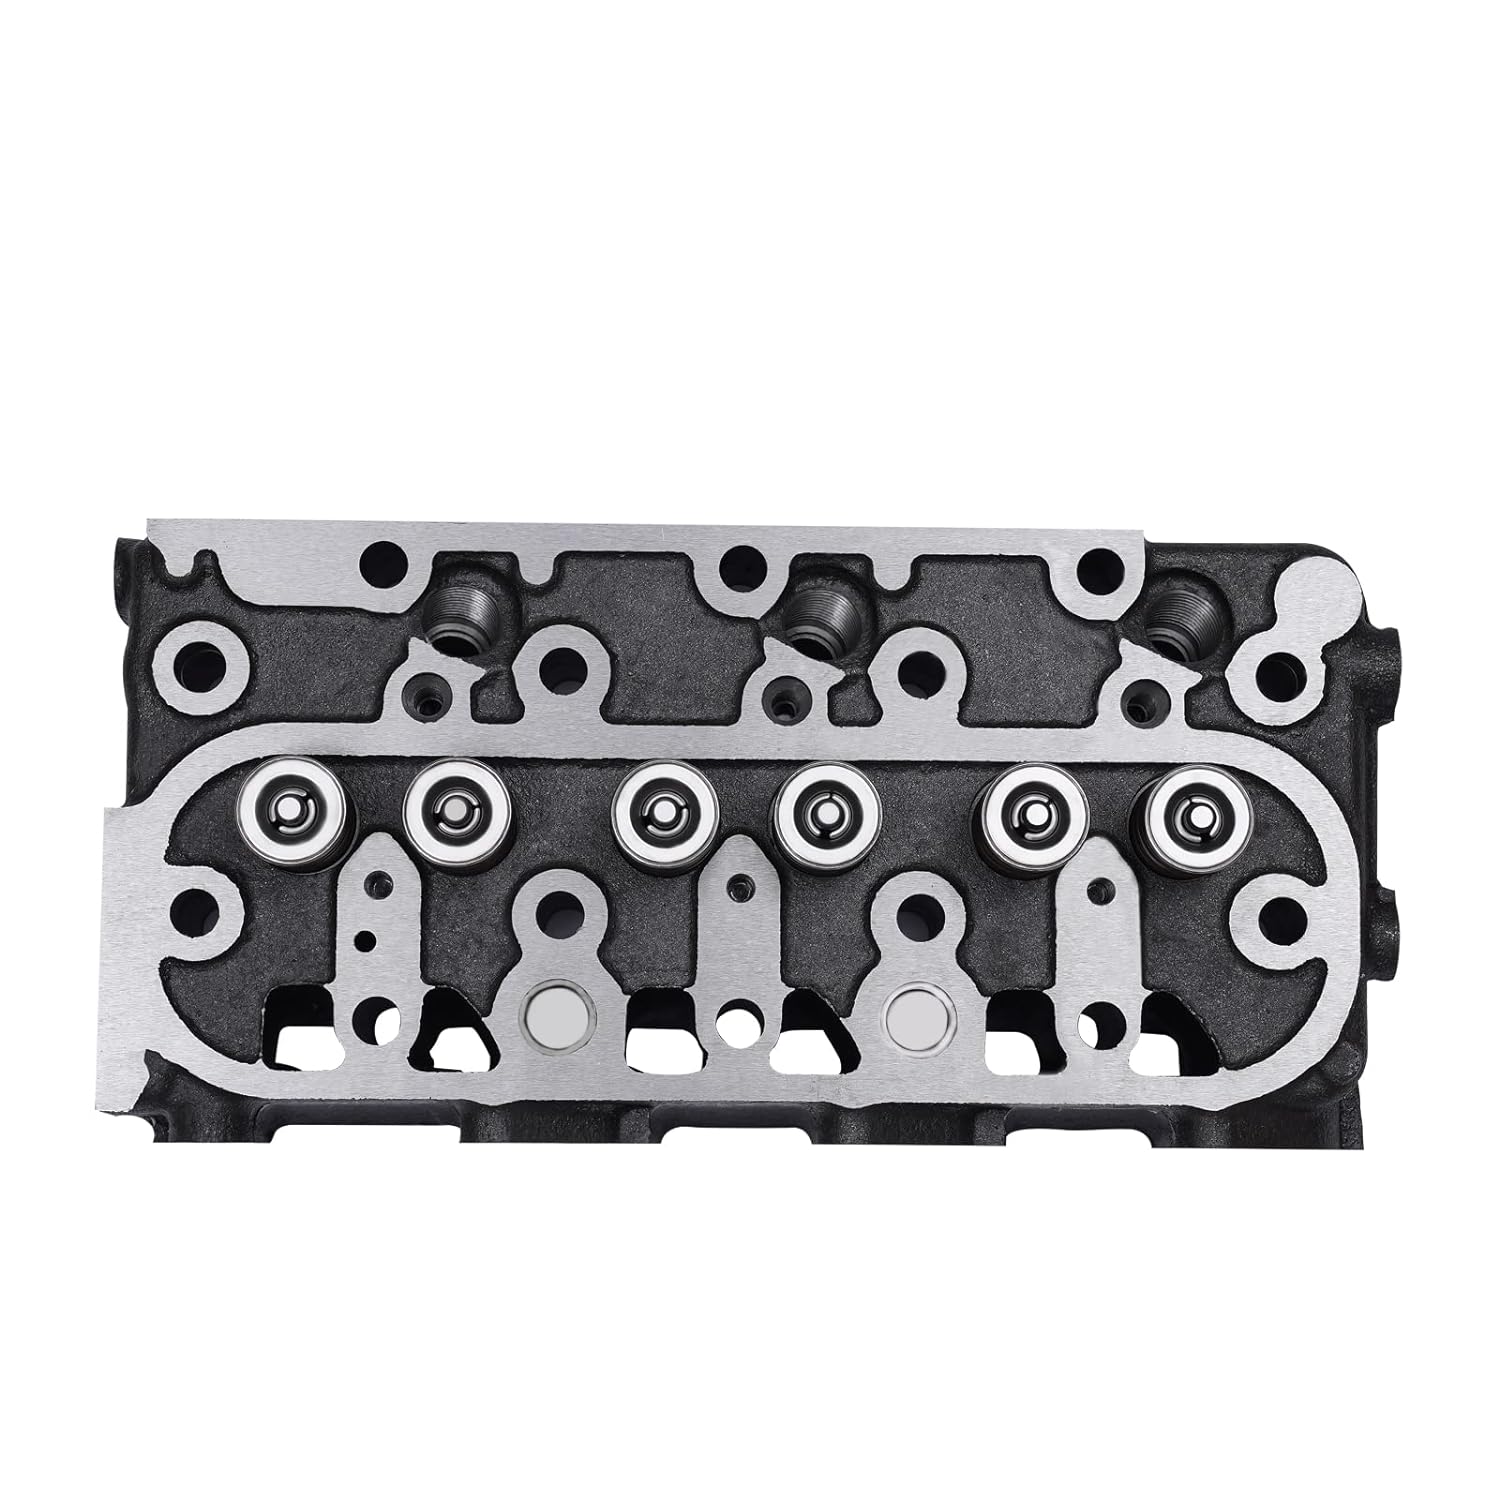 Complete Cylinder Head with Full Gasket Kit for Kubota D1005 Engine - KUDUPARTS